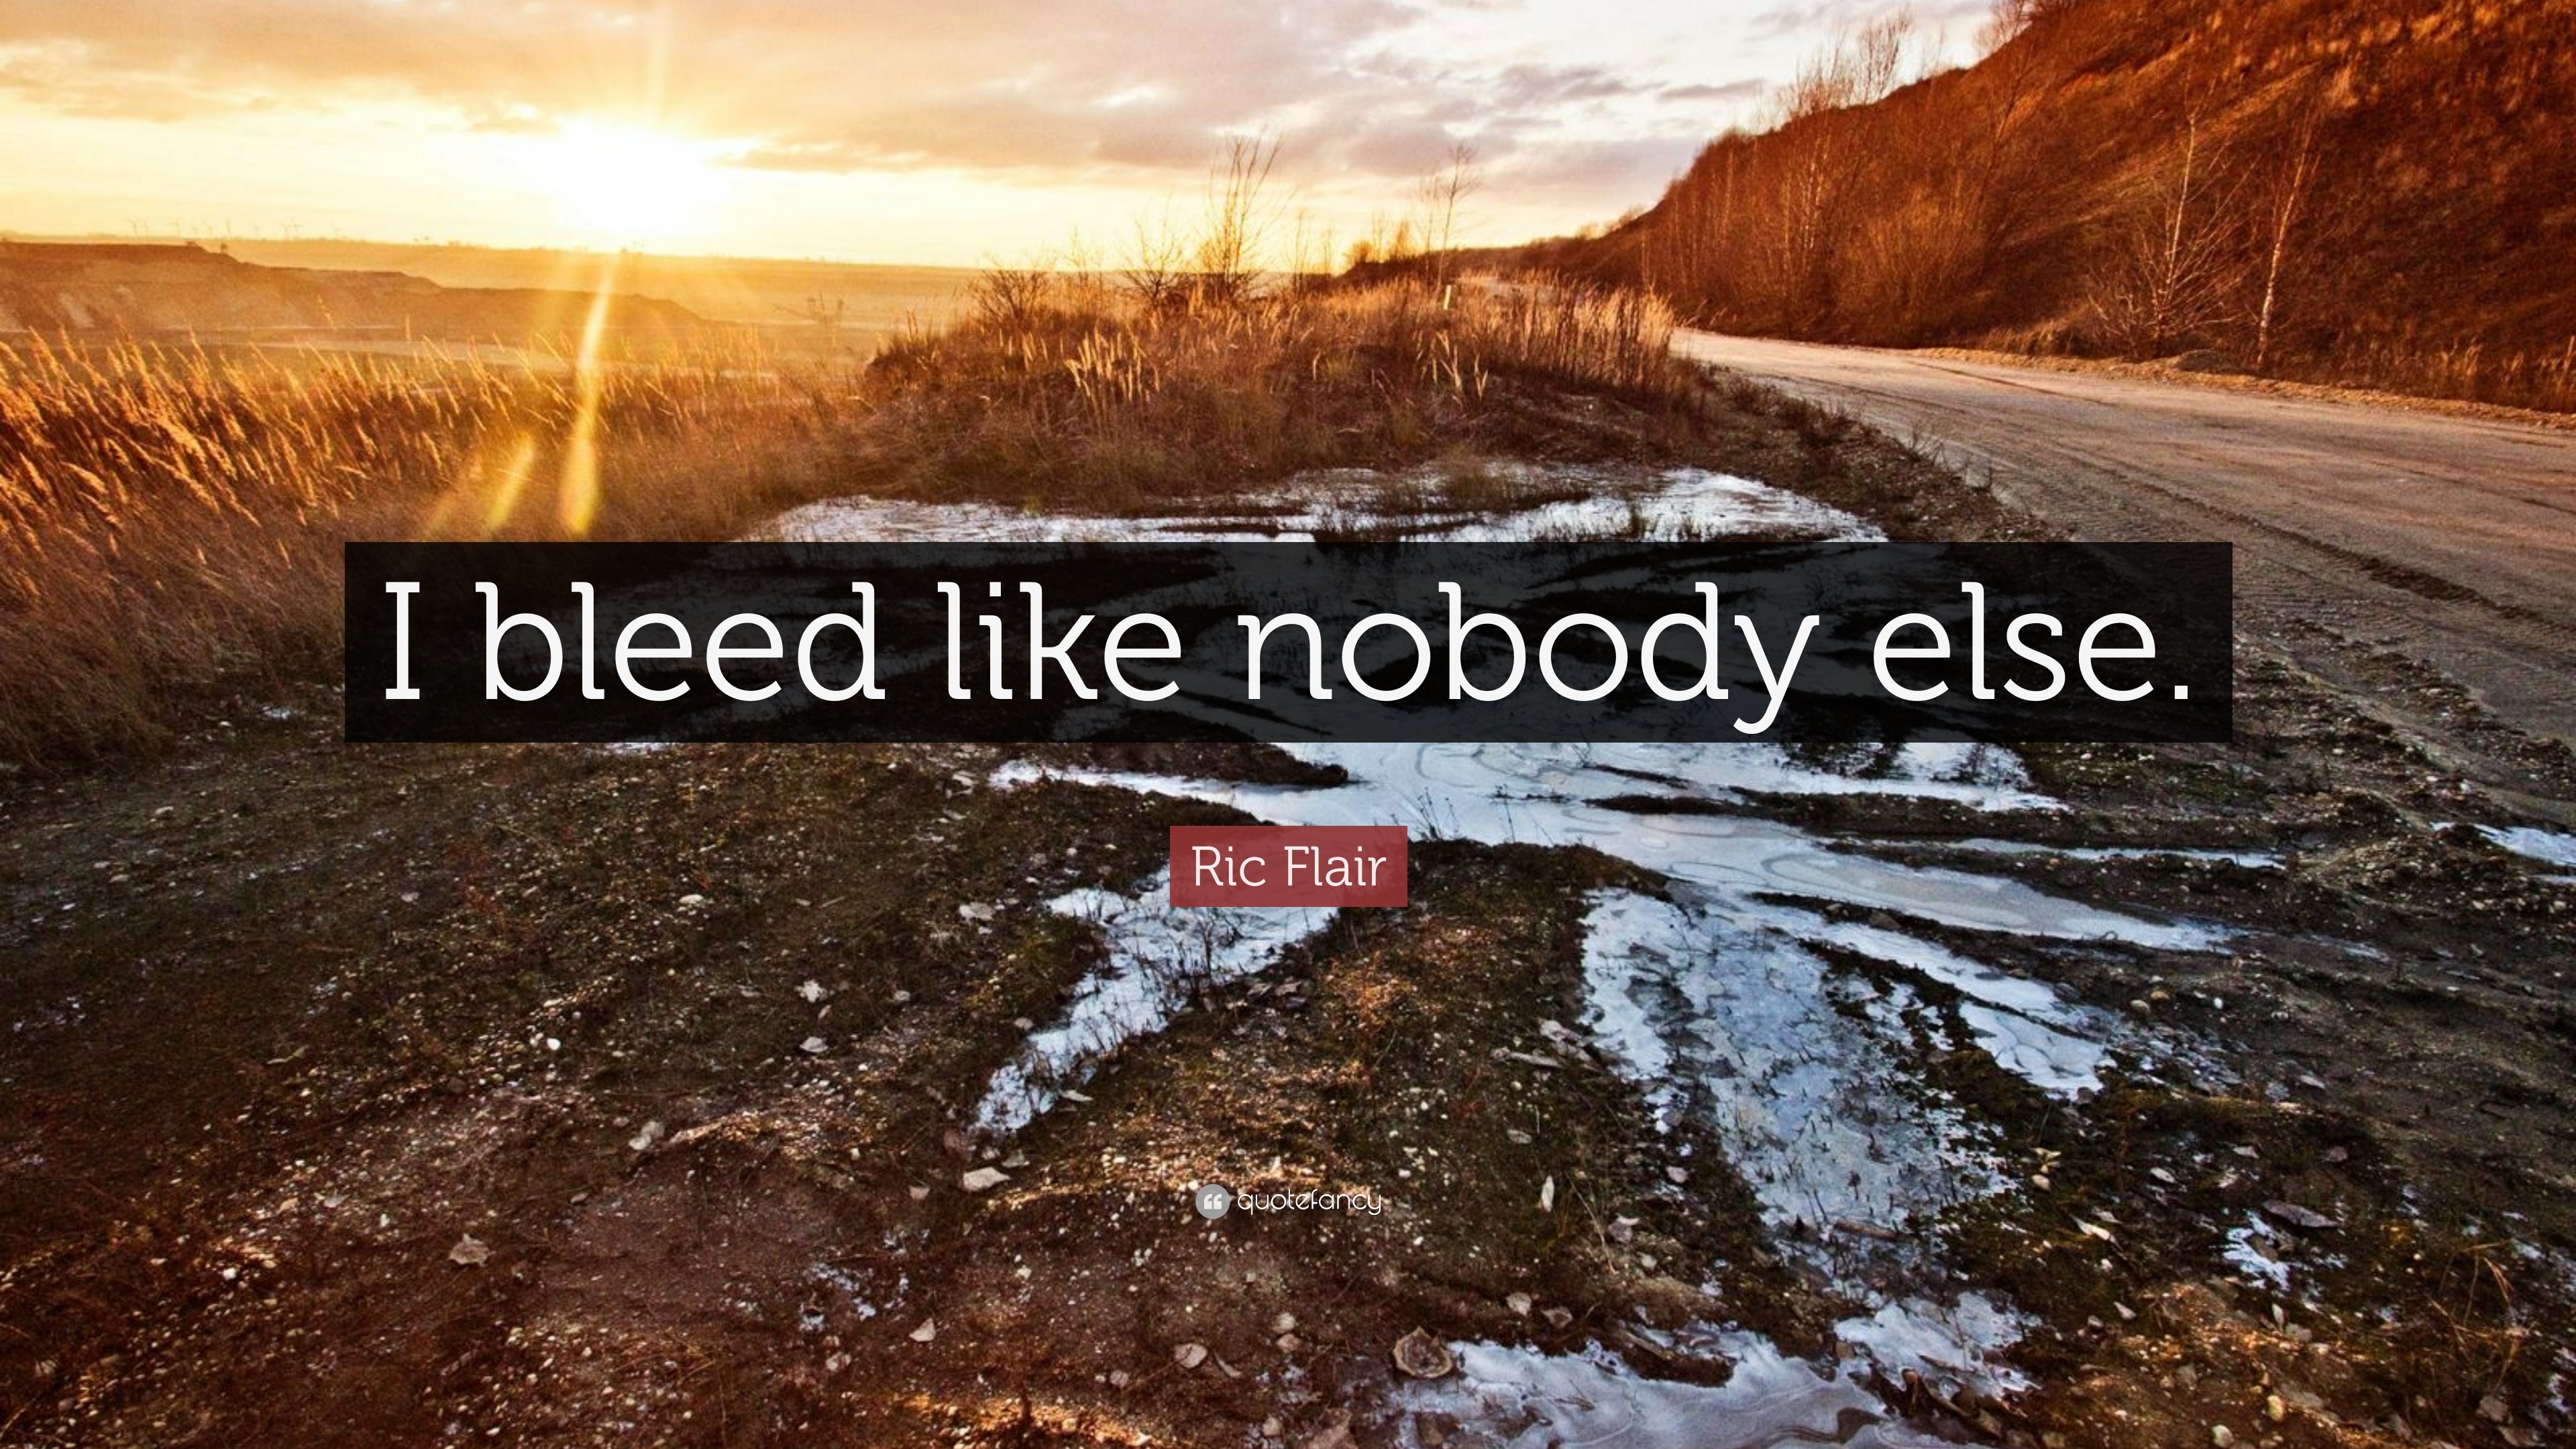 3840x2160 Ric Flair Quote: “I bleed like nobody else.”